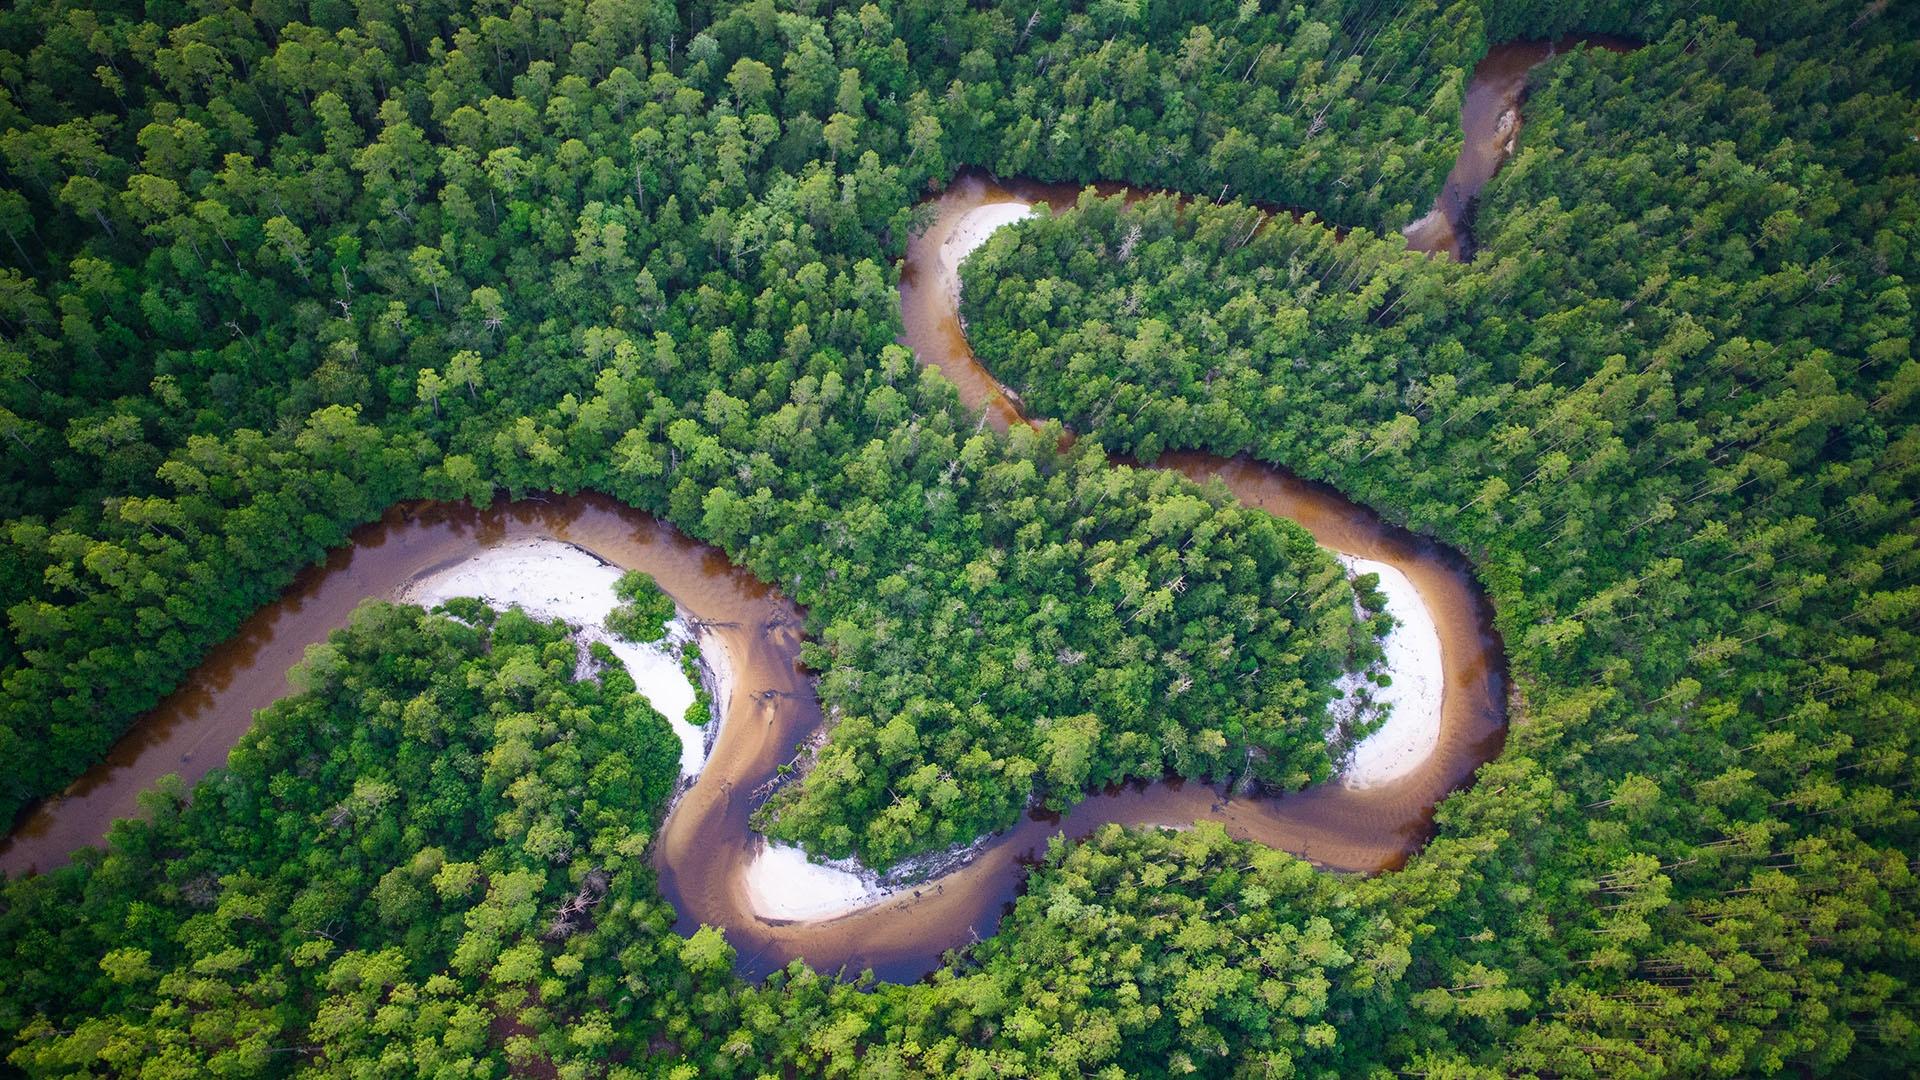 An aerial view of a river winding through lush longleaf pine habitat in the Florida Panhandle region